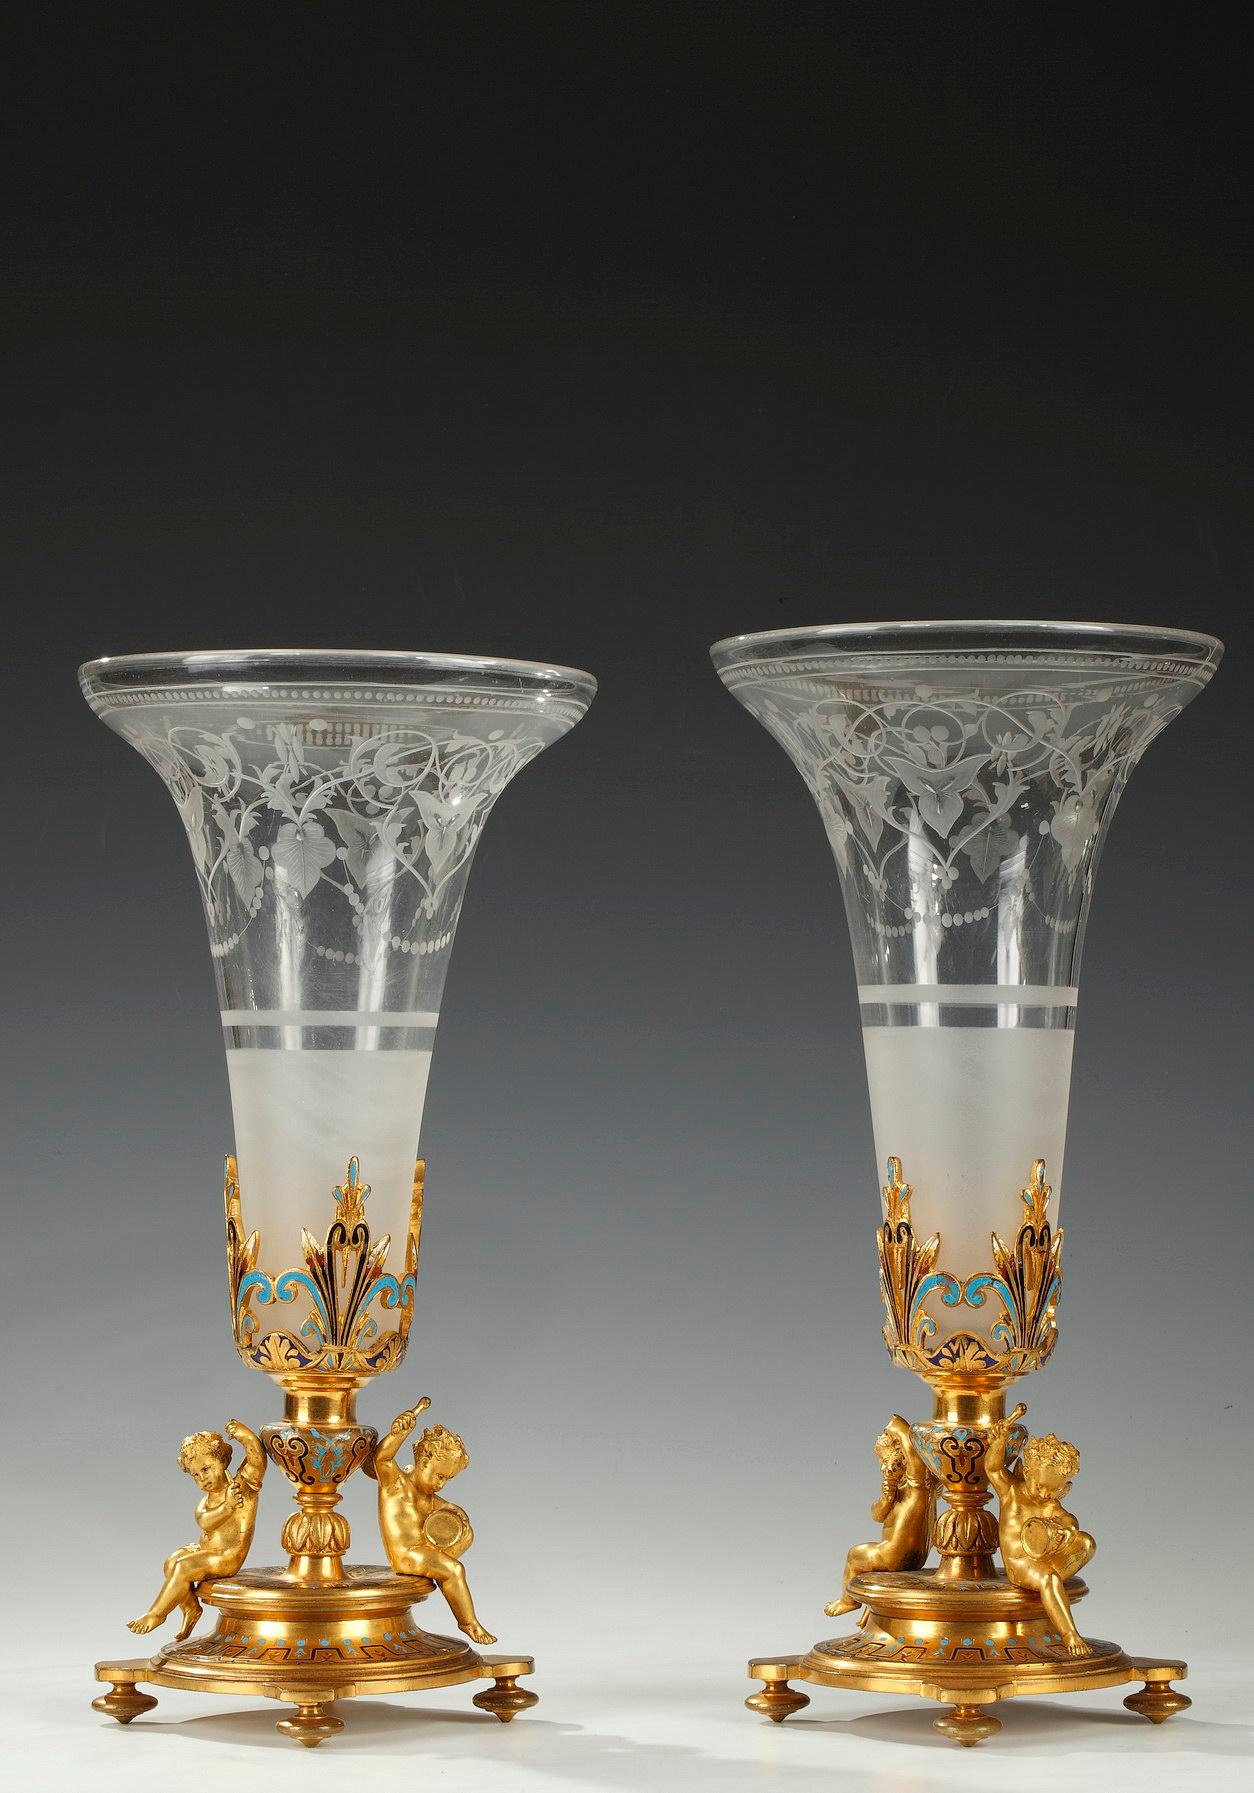 Elegant pair of trumpet-shaped vases attributed to A. Giroux, with flare neck in engraved crystal decorated with leafy interlacing and beads friezes. Removable, they are enclosed in circular pedestals in gilded bronze adorned with enameled geometric